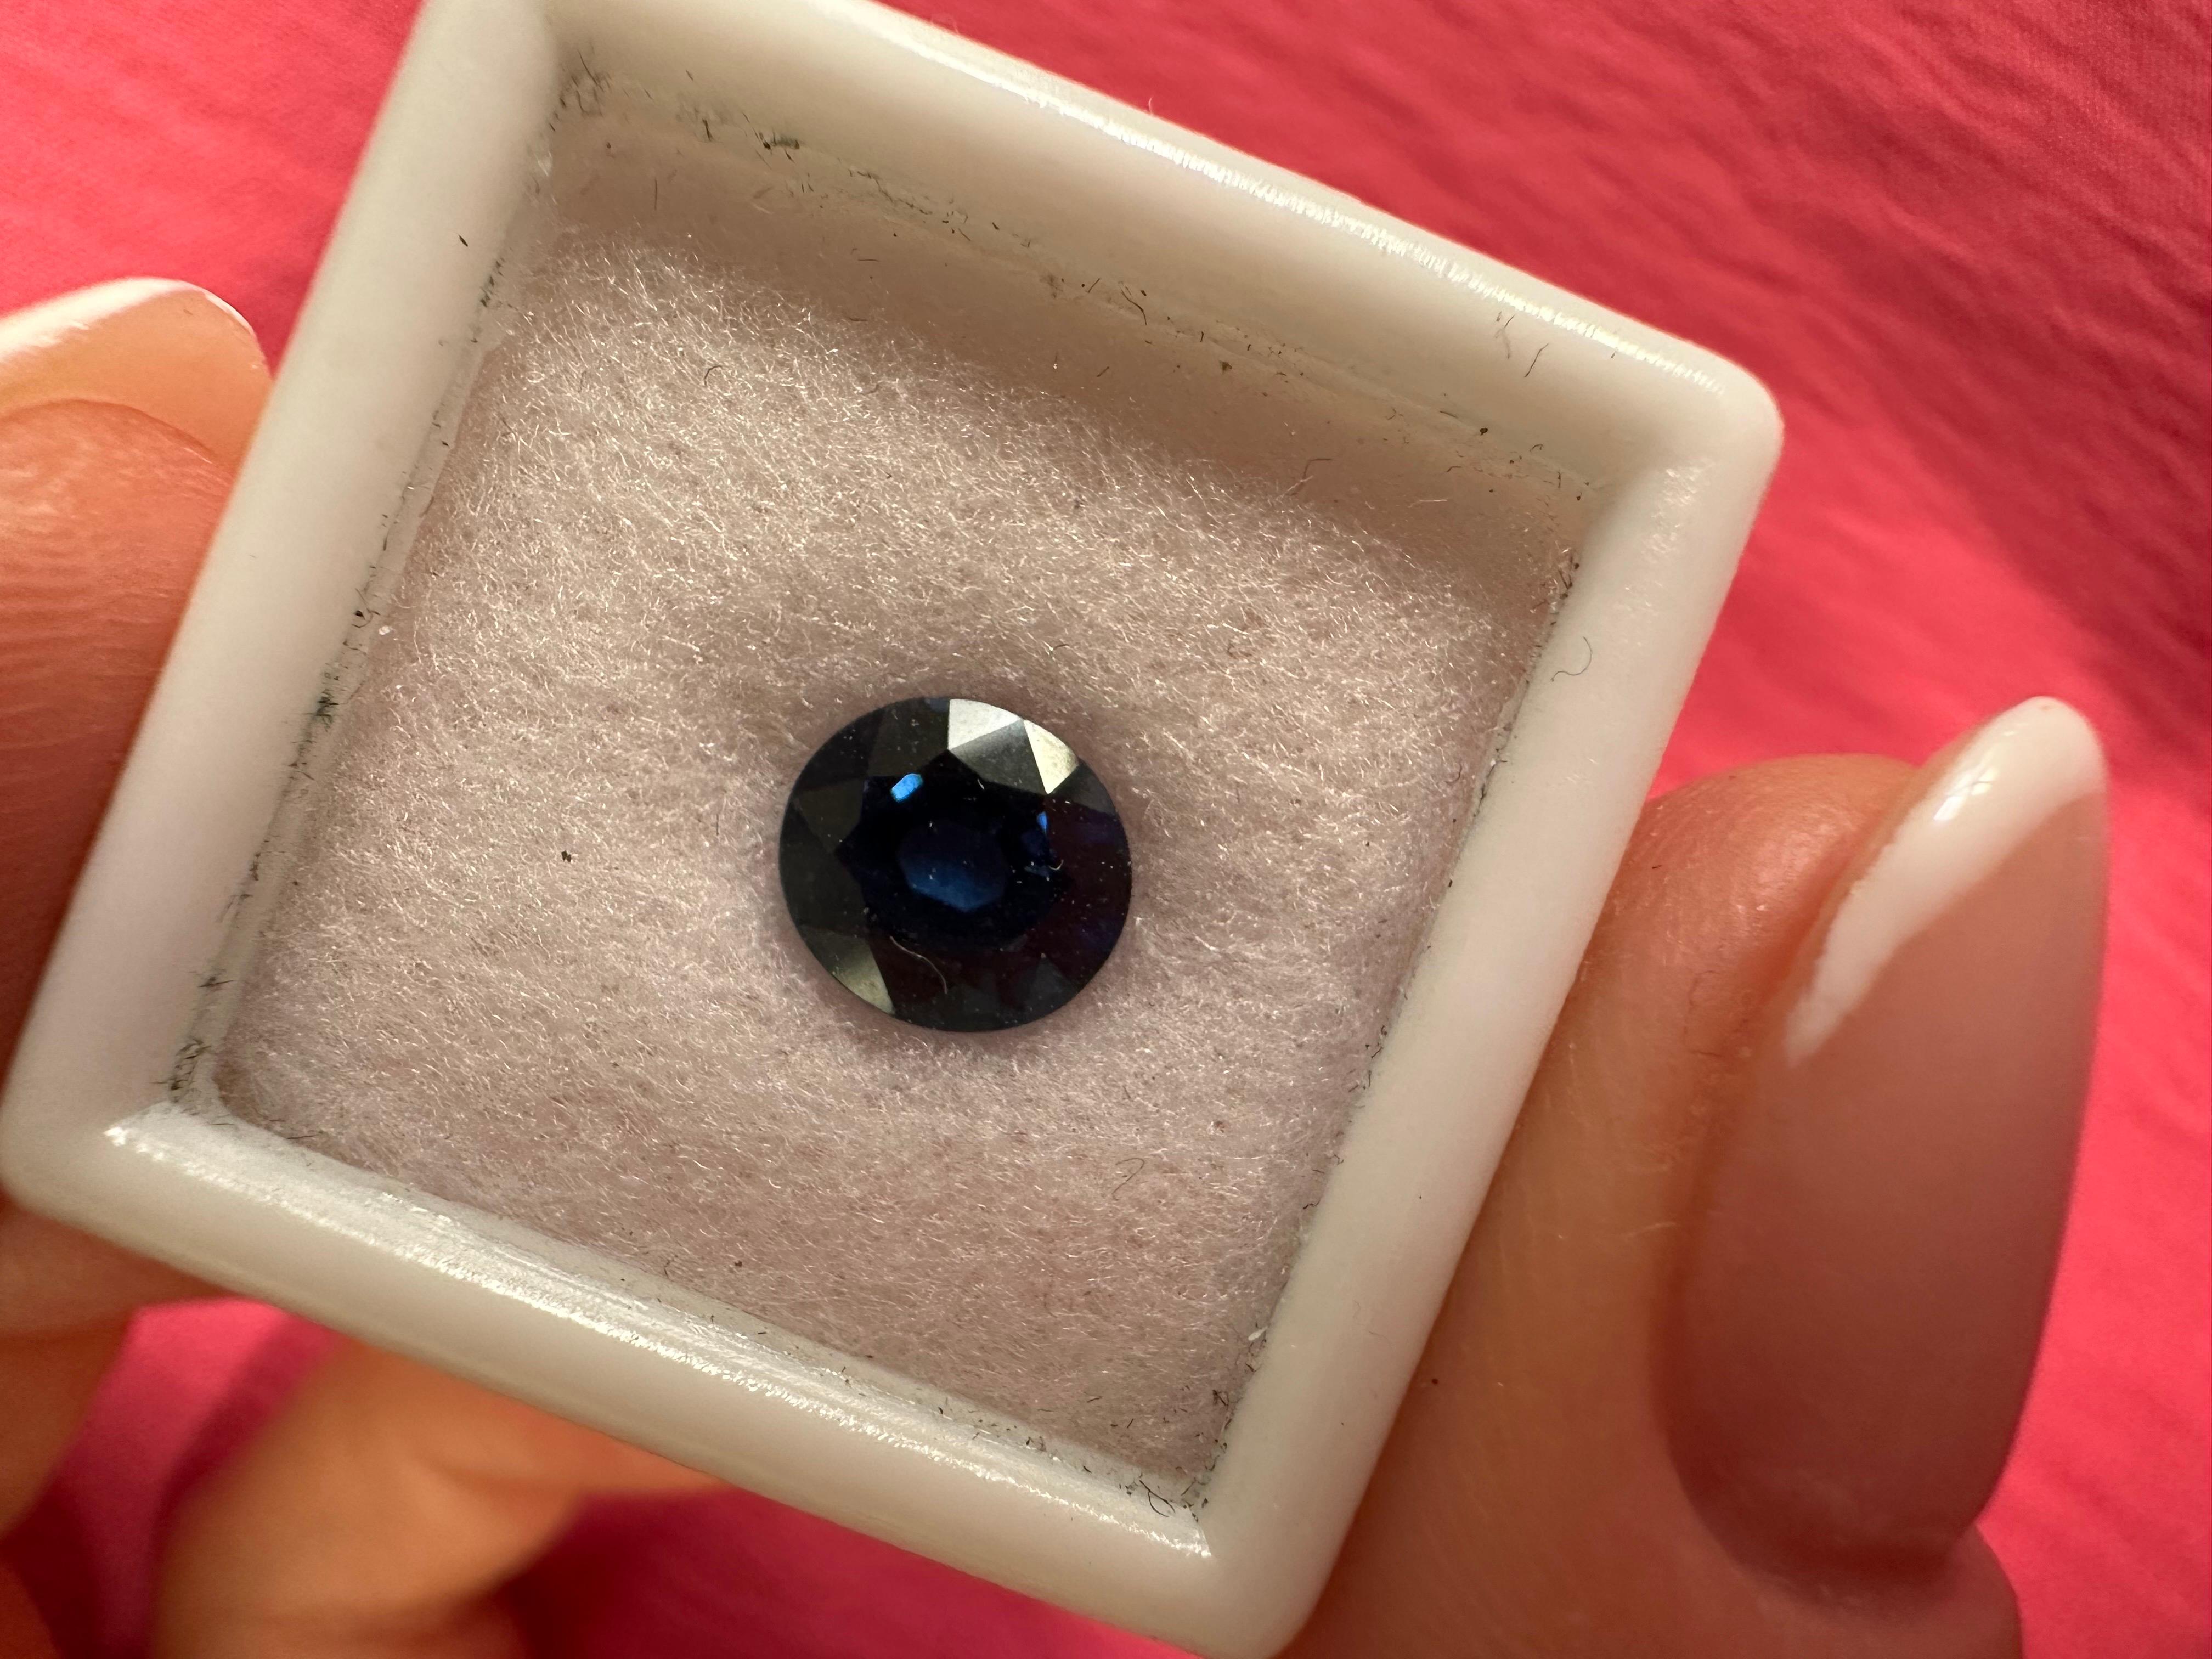 Natutal sapphire 7.7mm stunning blue color, round cut and Ceylon certified sapphire.

NATURAL GEMSTONE(S): SAPPHIRE
Clarity/Color: Slightly Included/Blue
Cut: Round
Treatment: heat only
MM:7.7mmx7mm


WHAT YOU GET AT STAMPAR JEWELERS:
Stampar